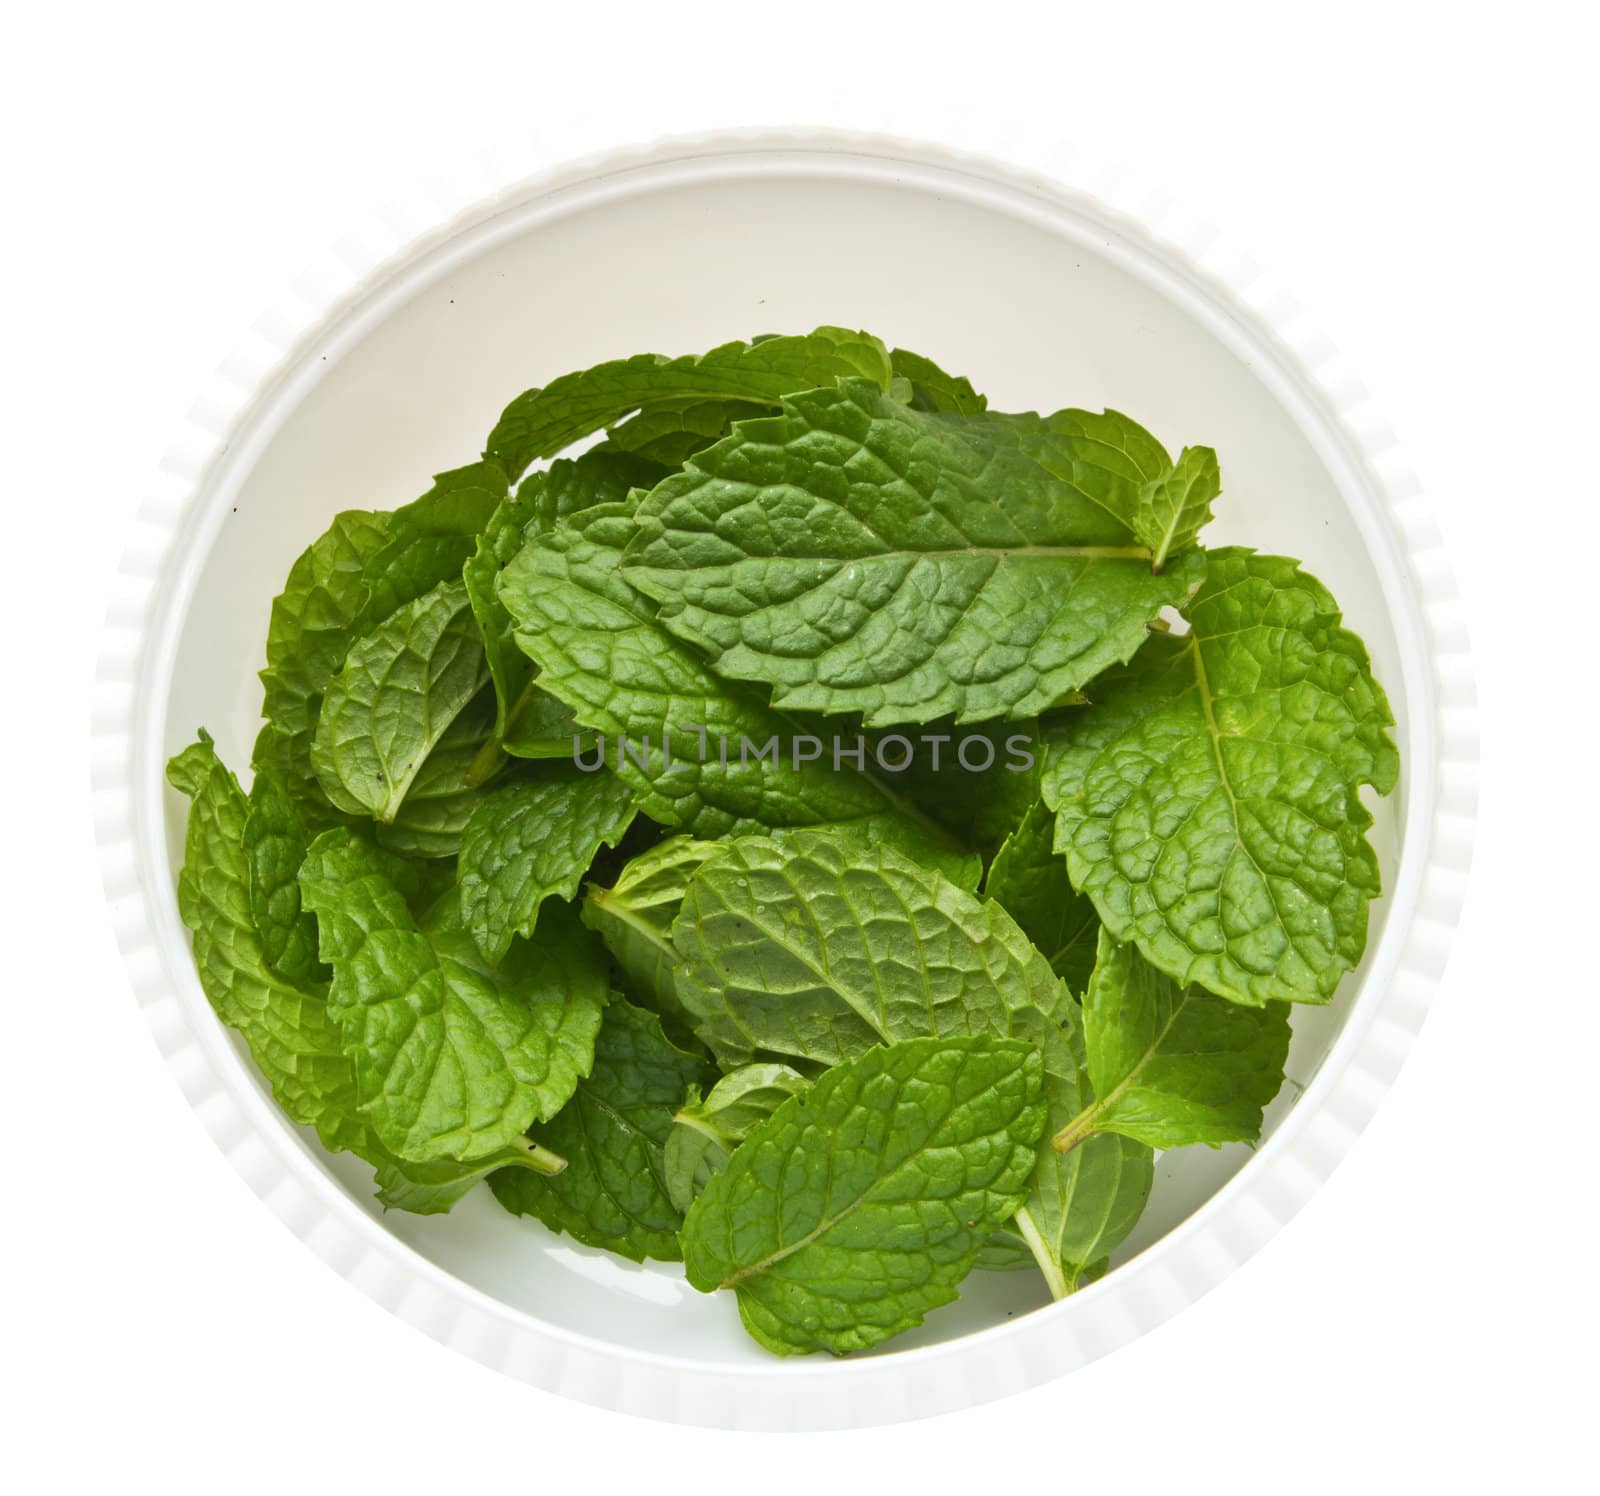 fresh mint leaves in cup isolated on white background.